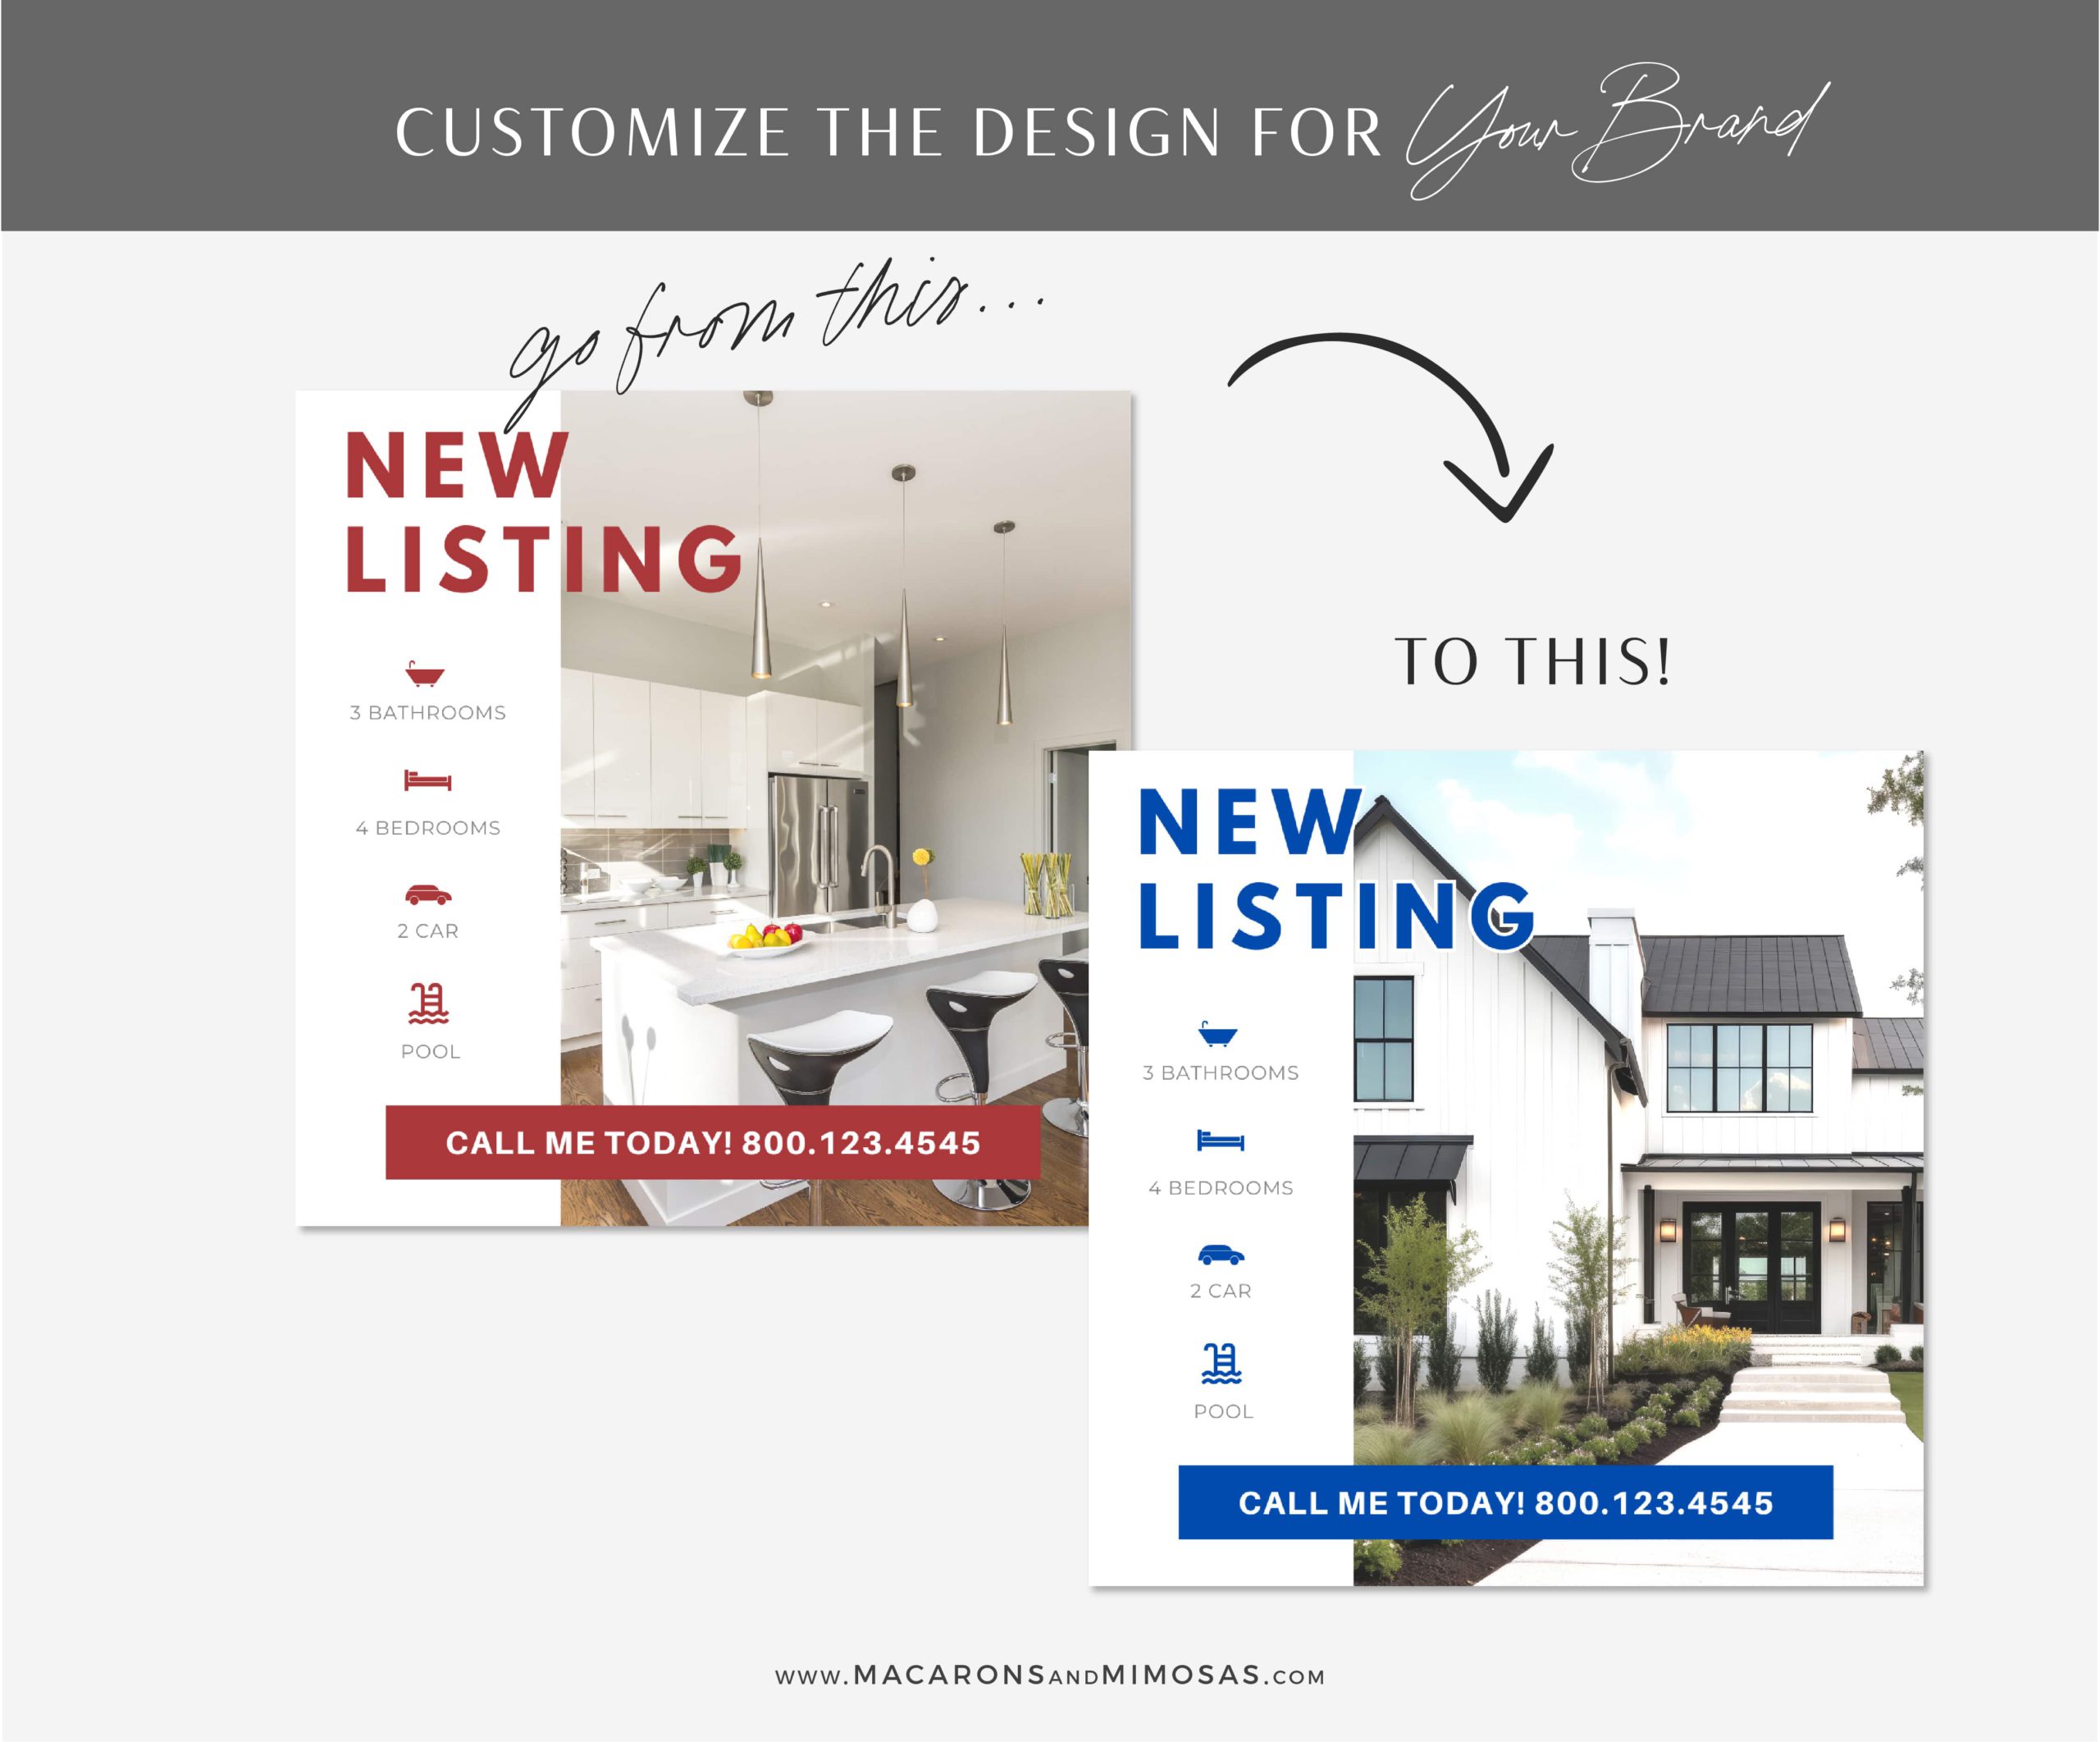 Keller Williams Instagram Templates are editable in Canva. Elevate your Instagram feed, showcase buyer and seller listings for your Real Estate business!